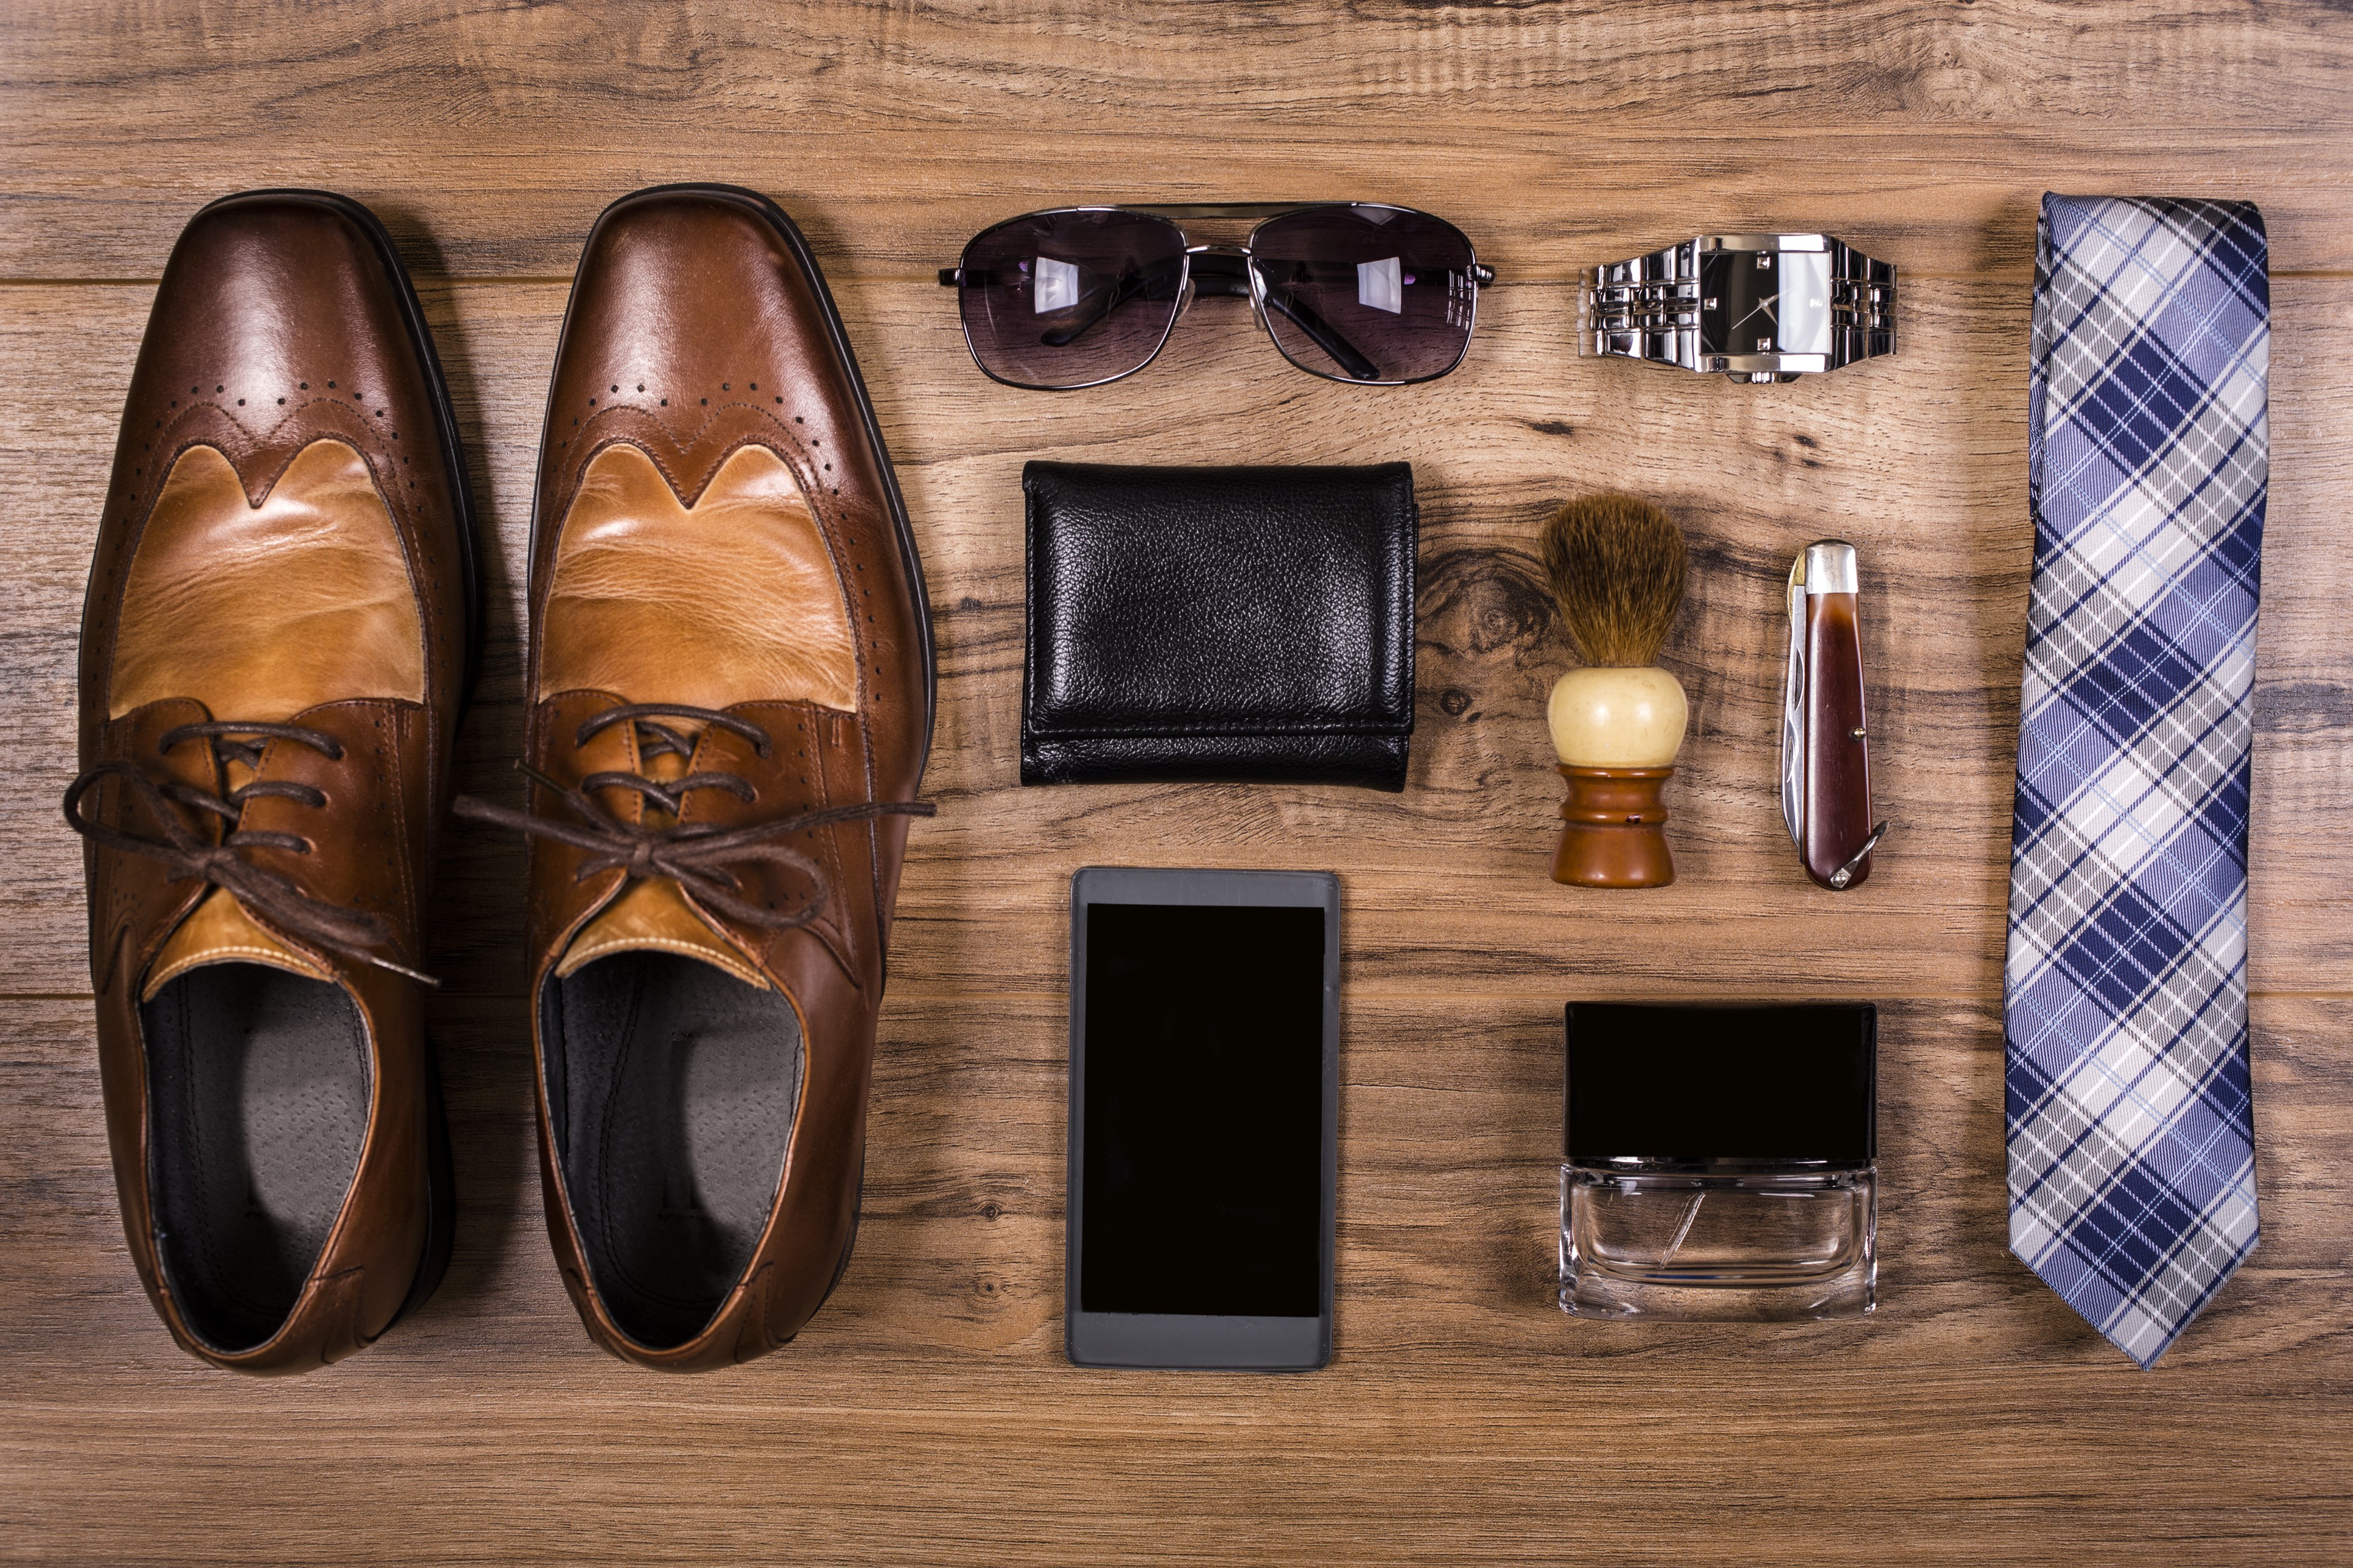 Some stylish Father’s Day gift ideas for your dad (from top left): a pair of brown dress shoes, sunglasses, wallet, smartphone, watch, shaving brush, pocket knife, cologne and a blue plaid tie.